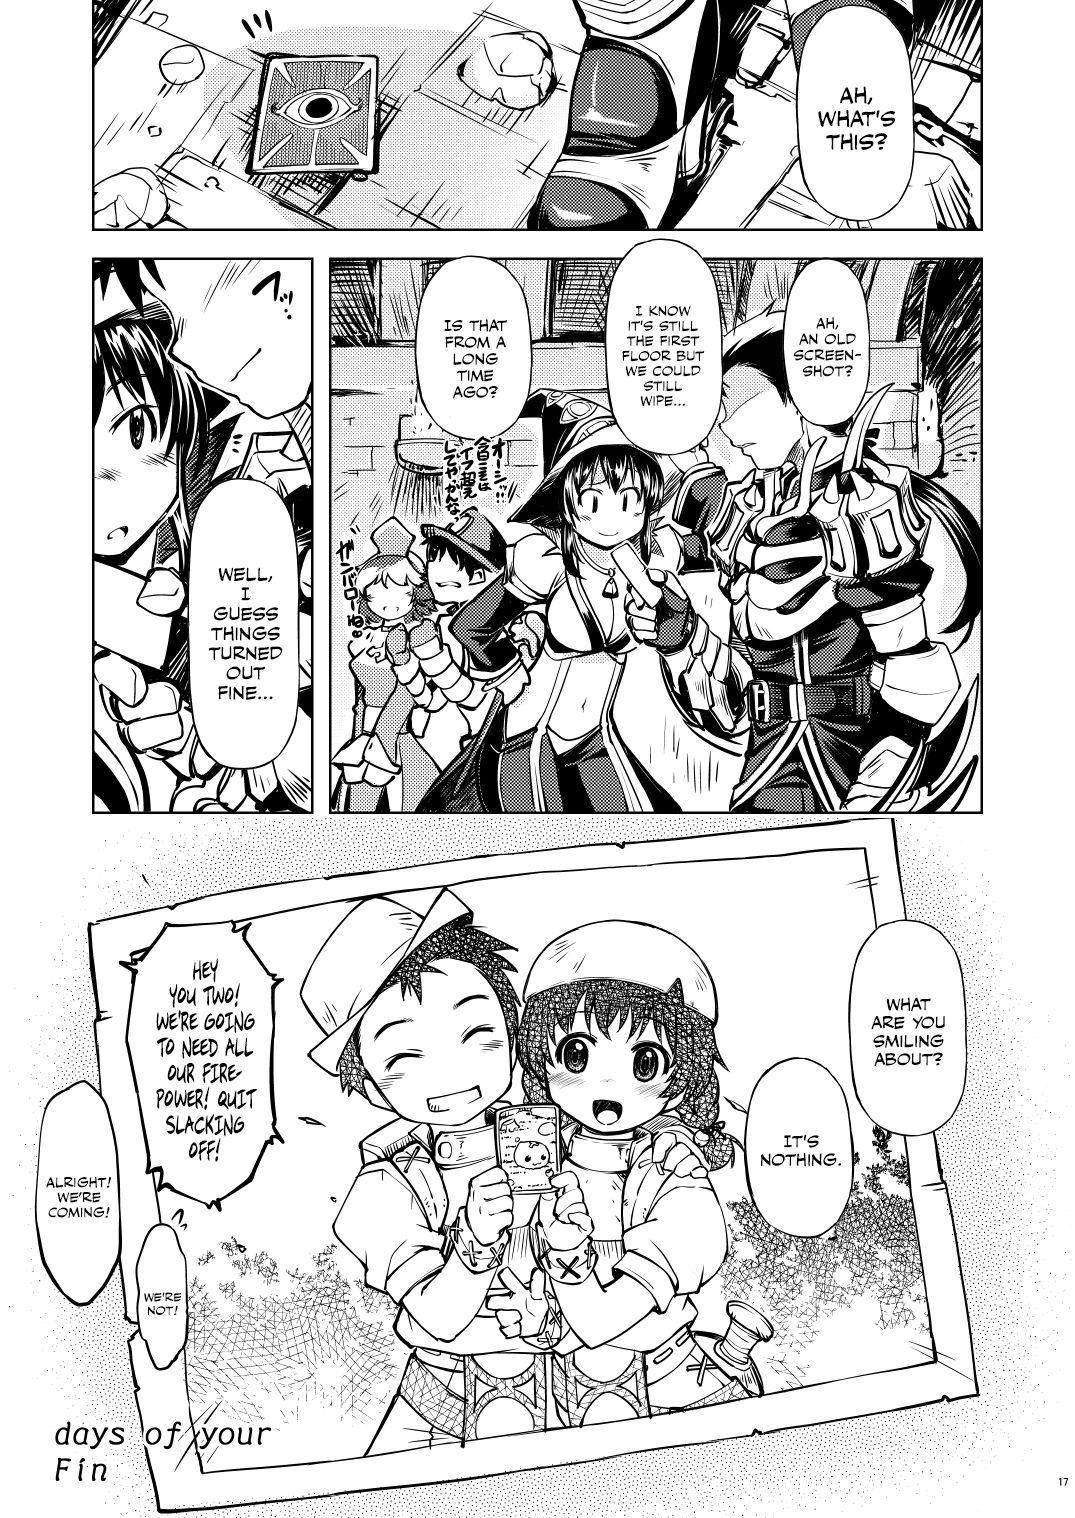 Youporn days of your - Ragnarok online Gay Youngmen - Page 16